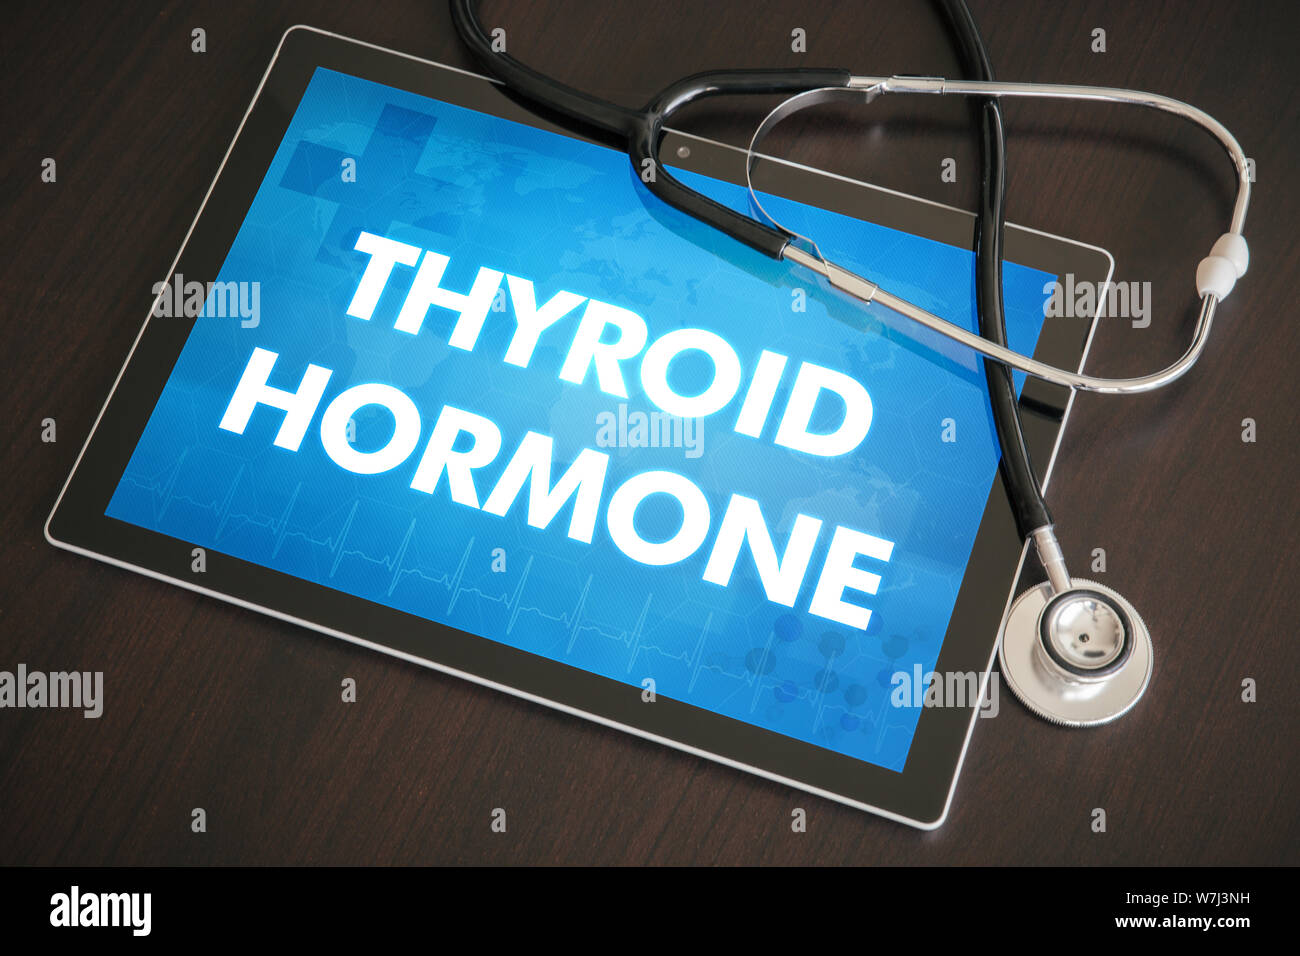 Thyroid hormone (endocrine disease) diagnosis medical concept on tablet screen with stethoscope. Stock Photo